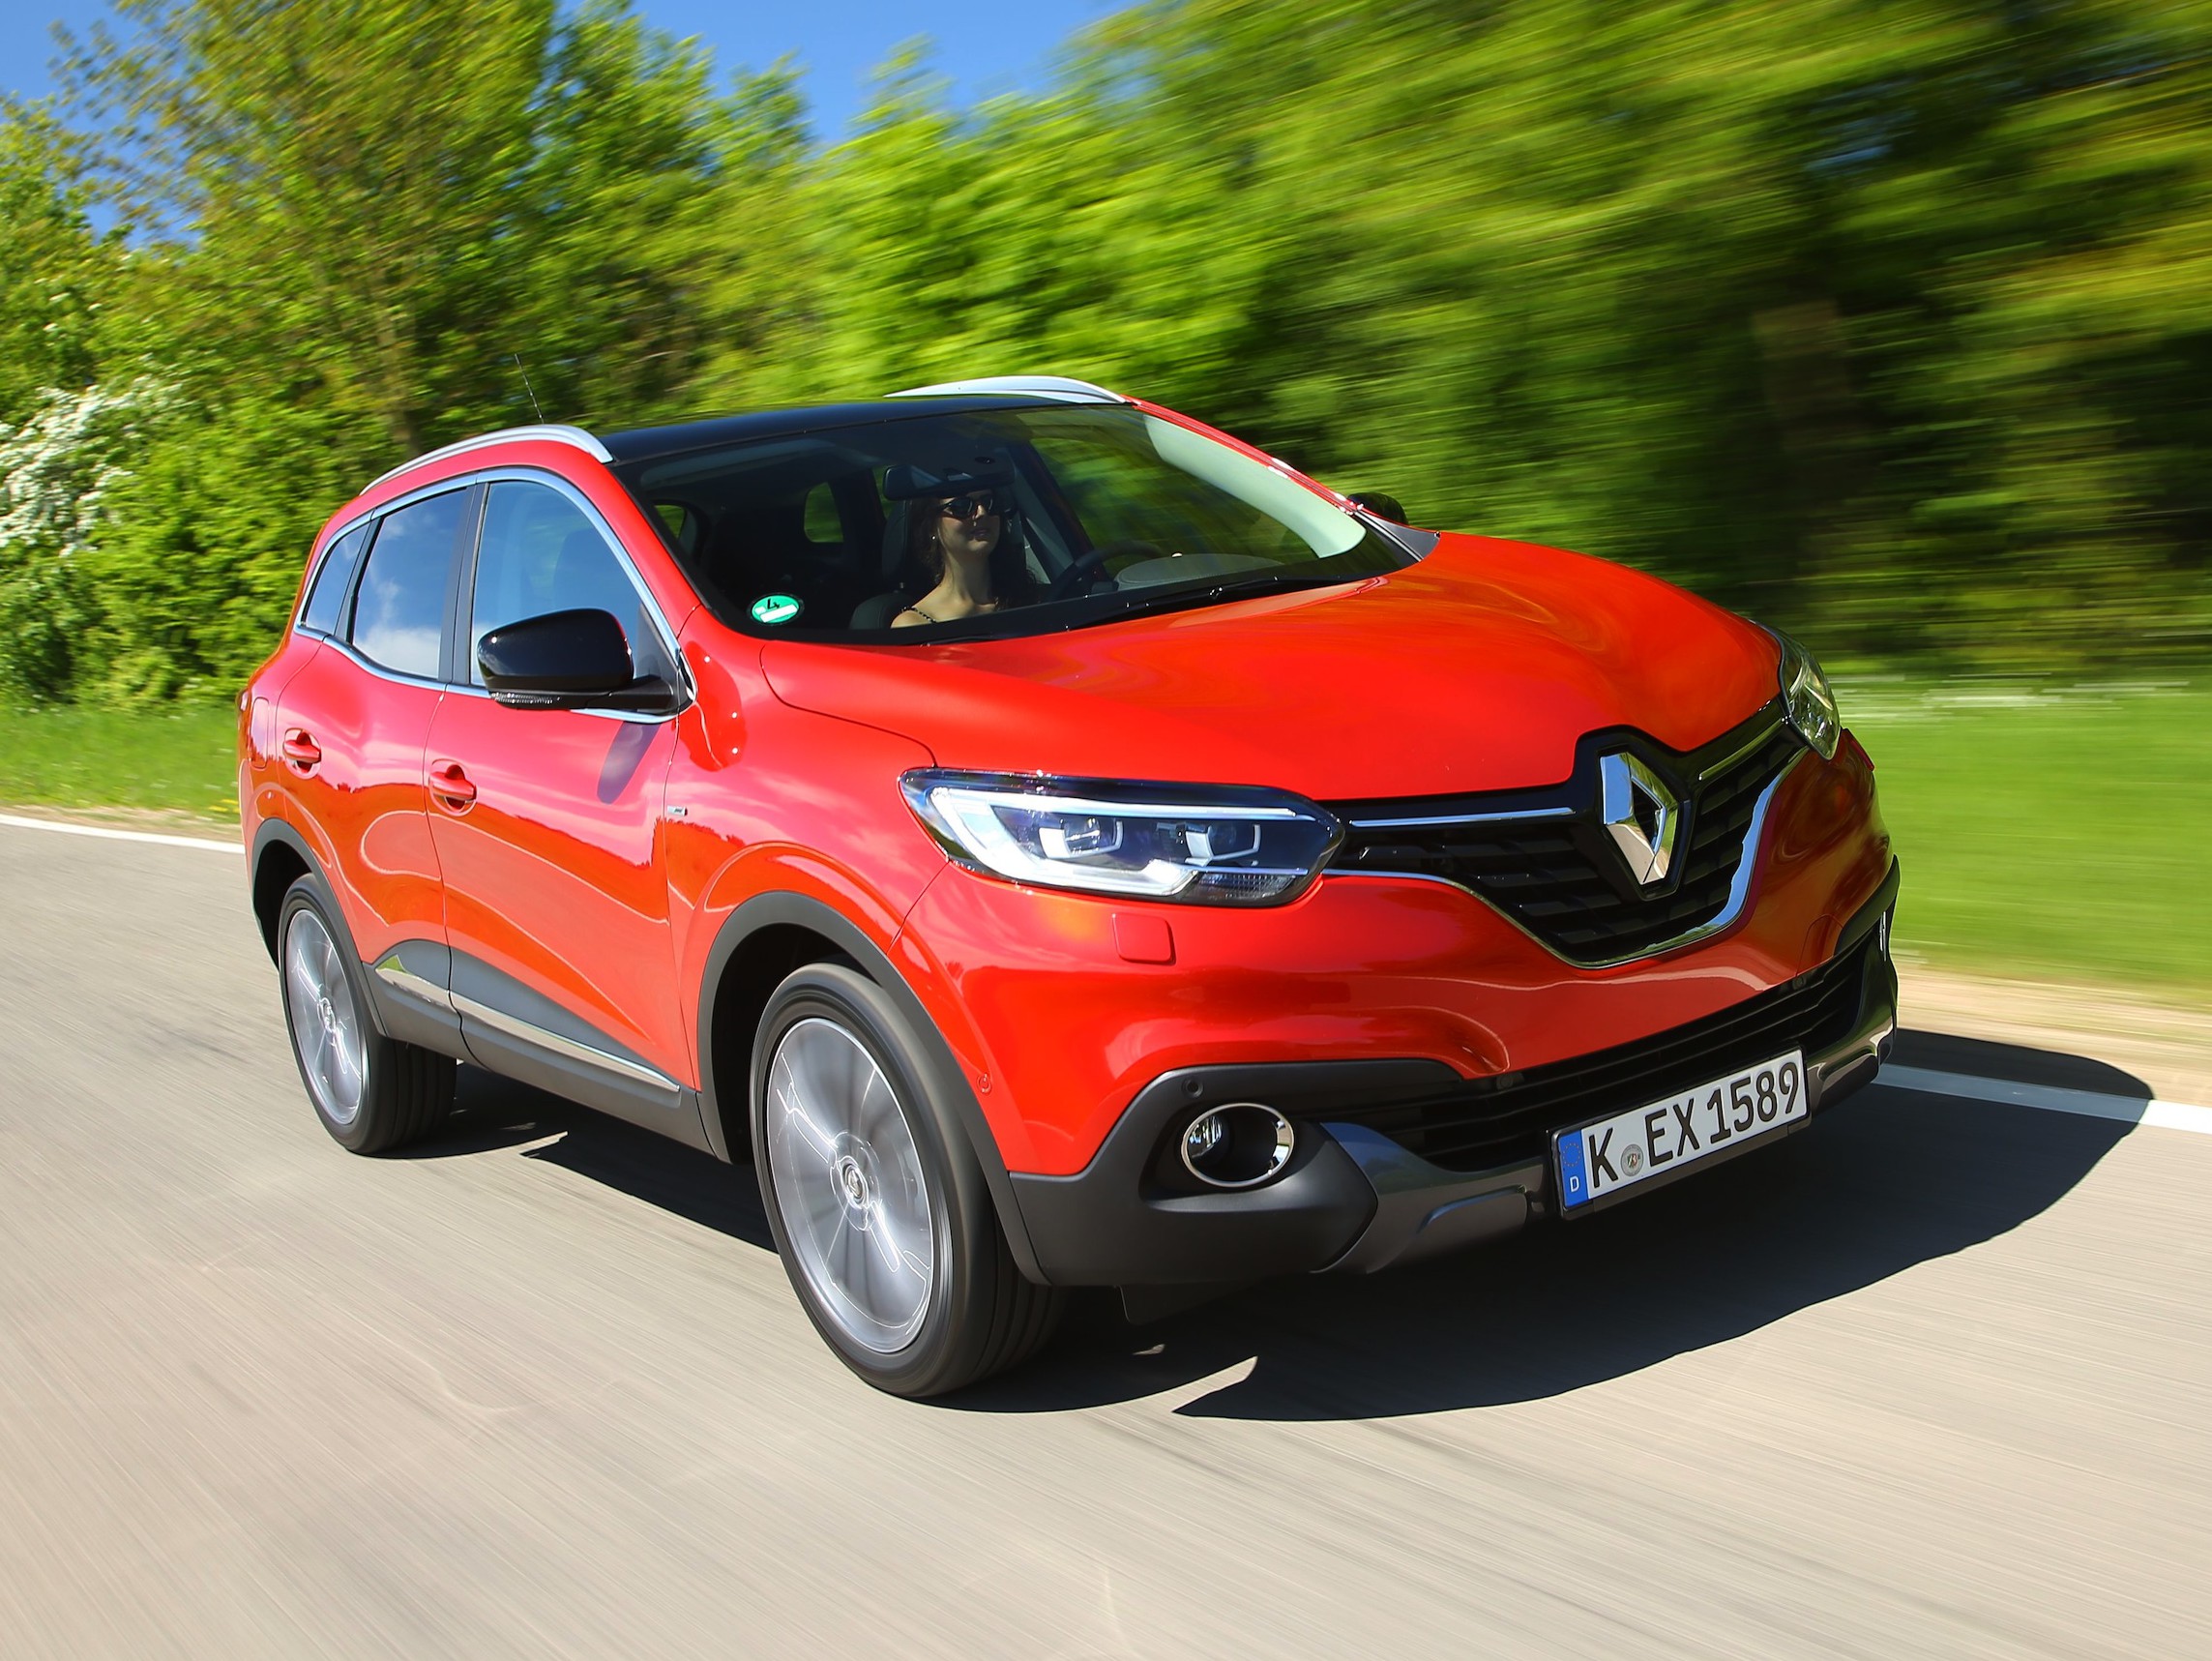 Renault new. Рено Кадьяр паркетник. Рено паркетник новый. Рено кроссовер 2015. Рено Каджар 2015.